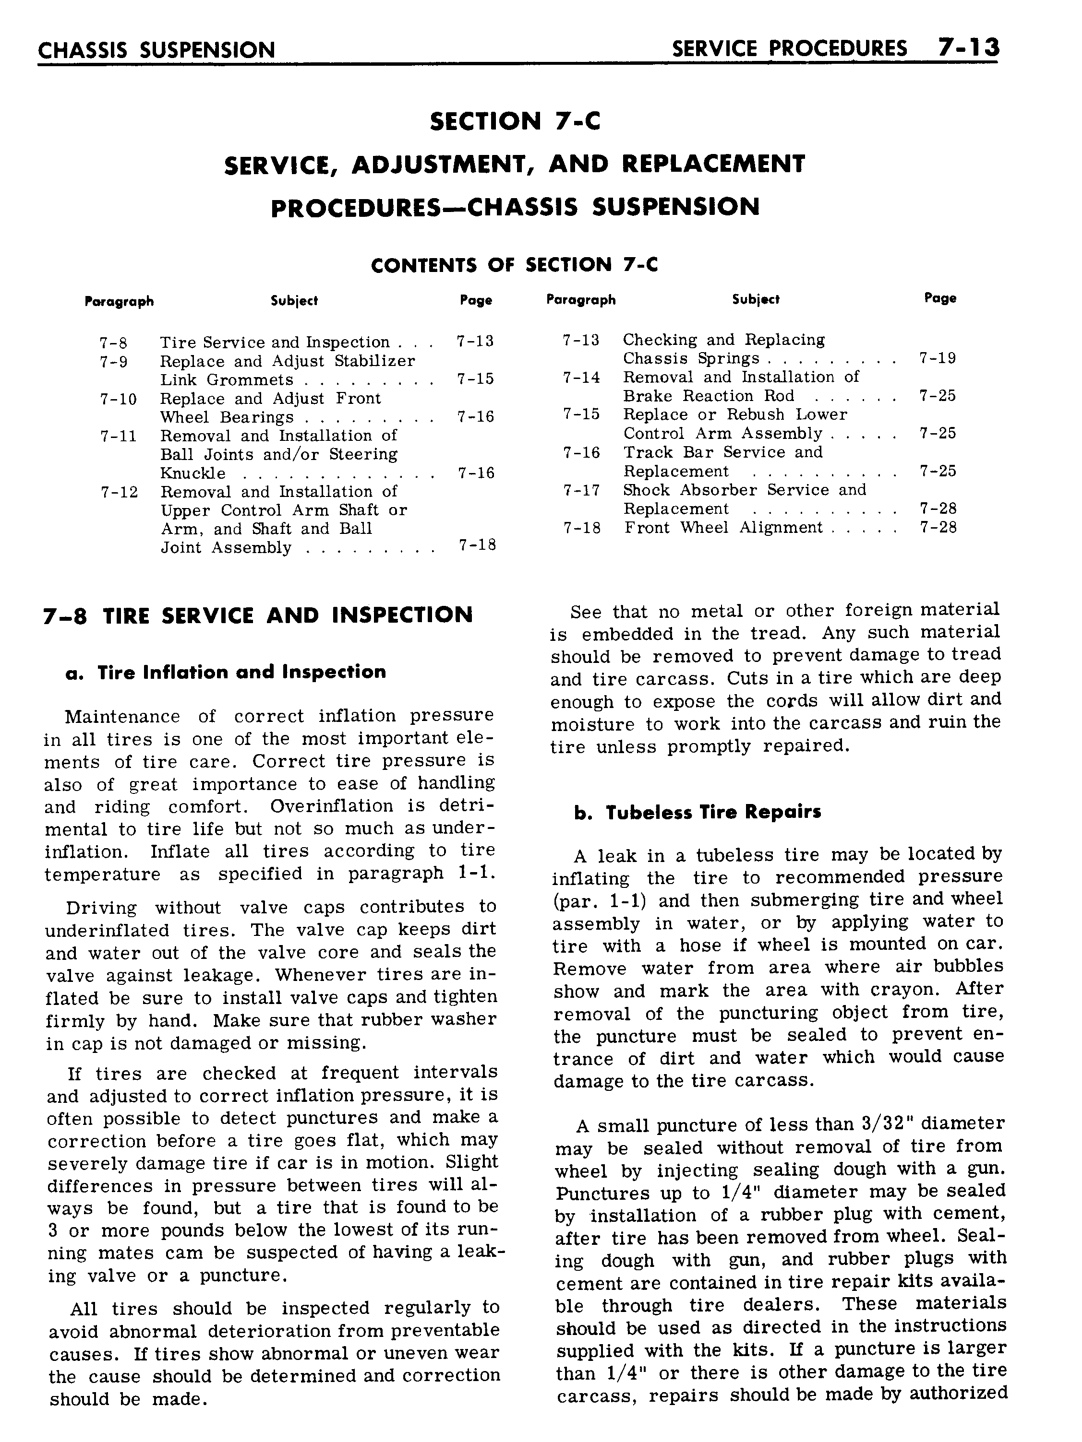 n_07 1961 Buick Shop Manual - Chassis Suspension-013-013.jpg